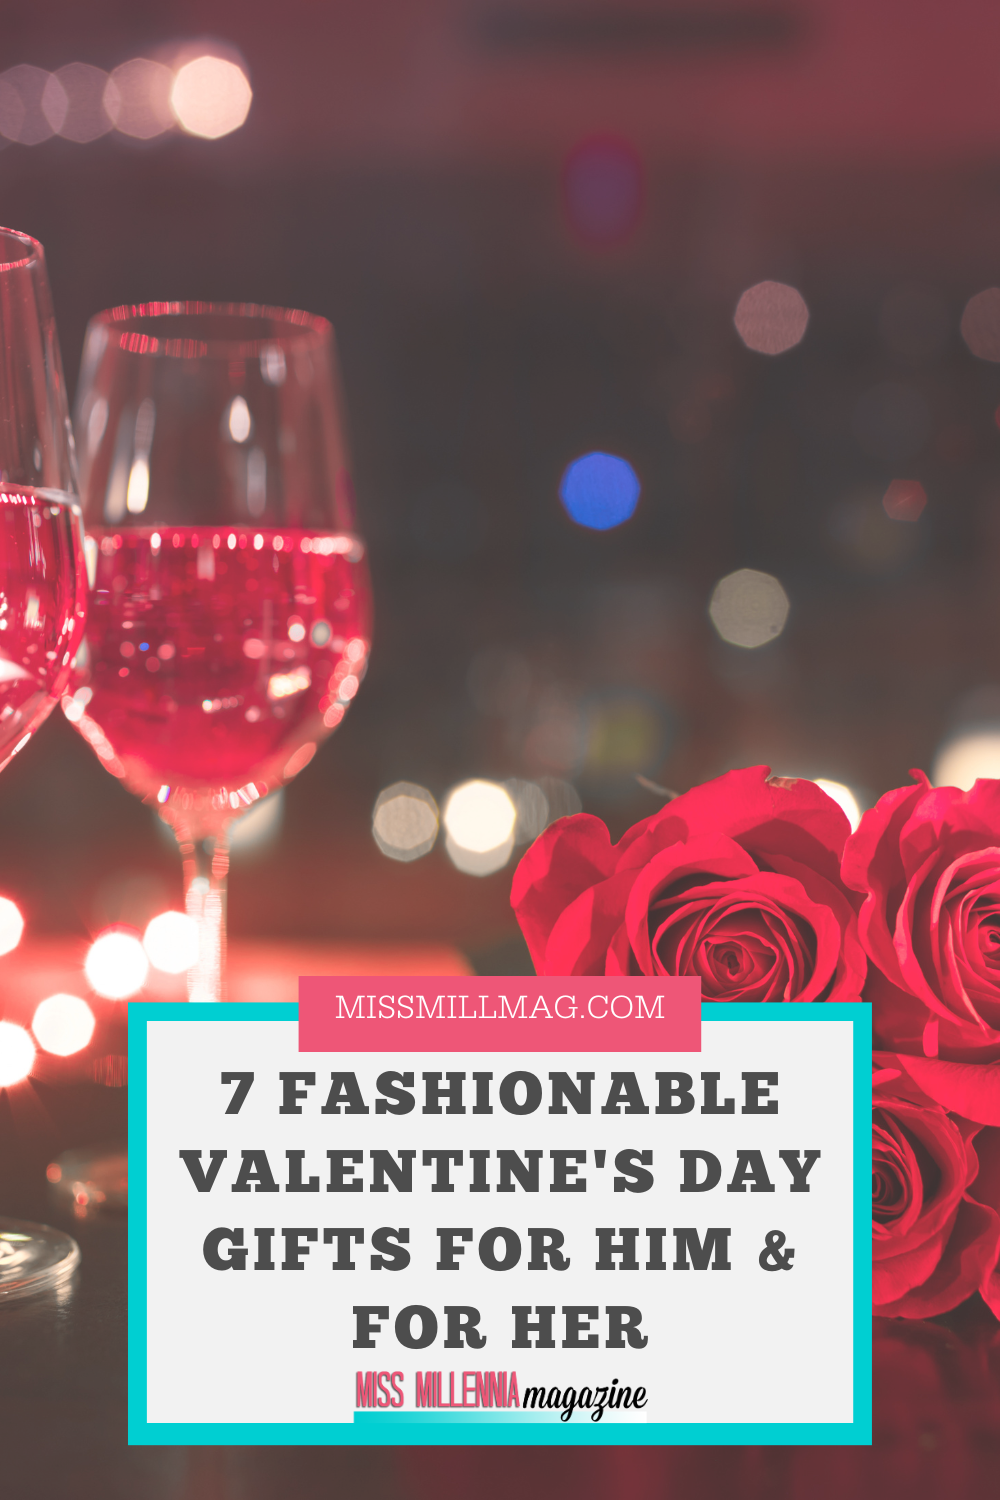 7 Fashionable Valentine’s Day Gifts For Him & For Her